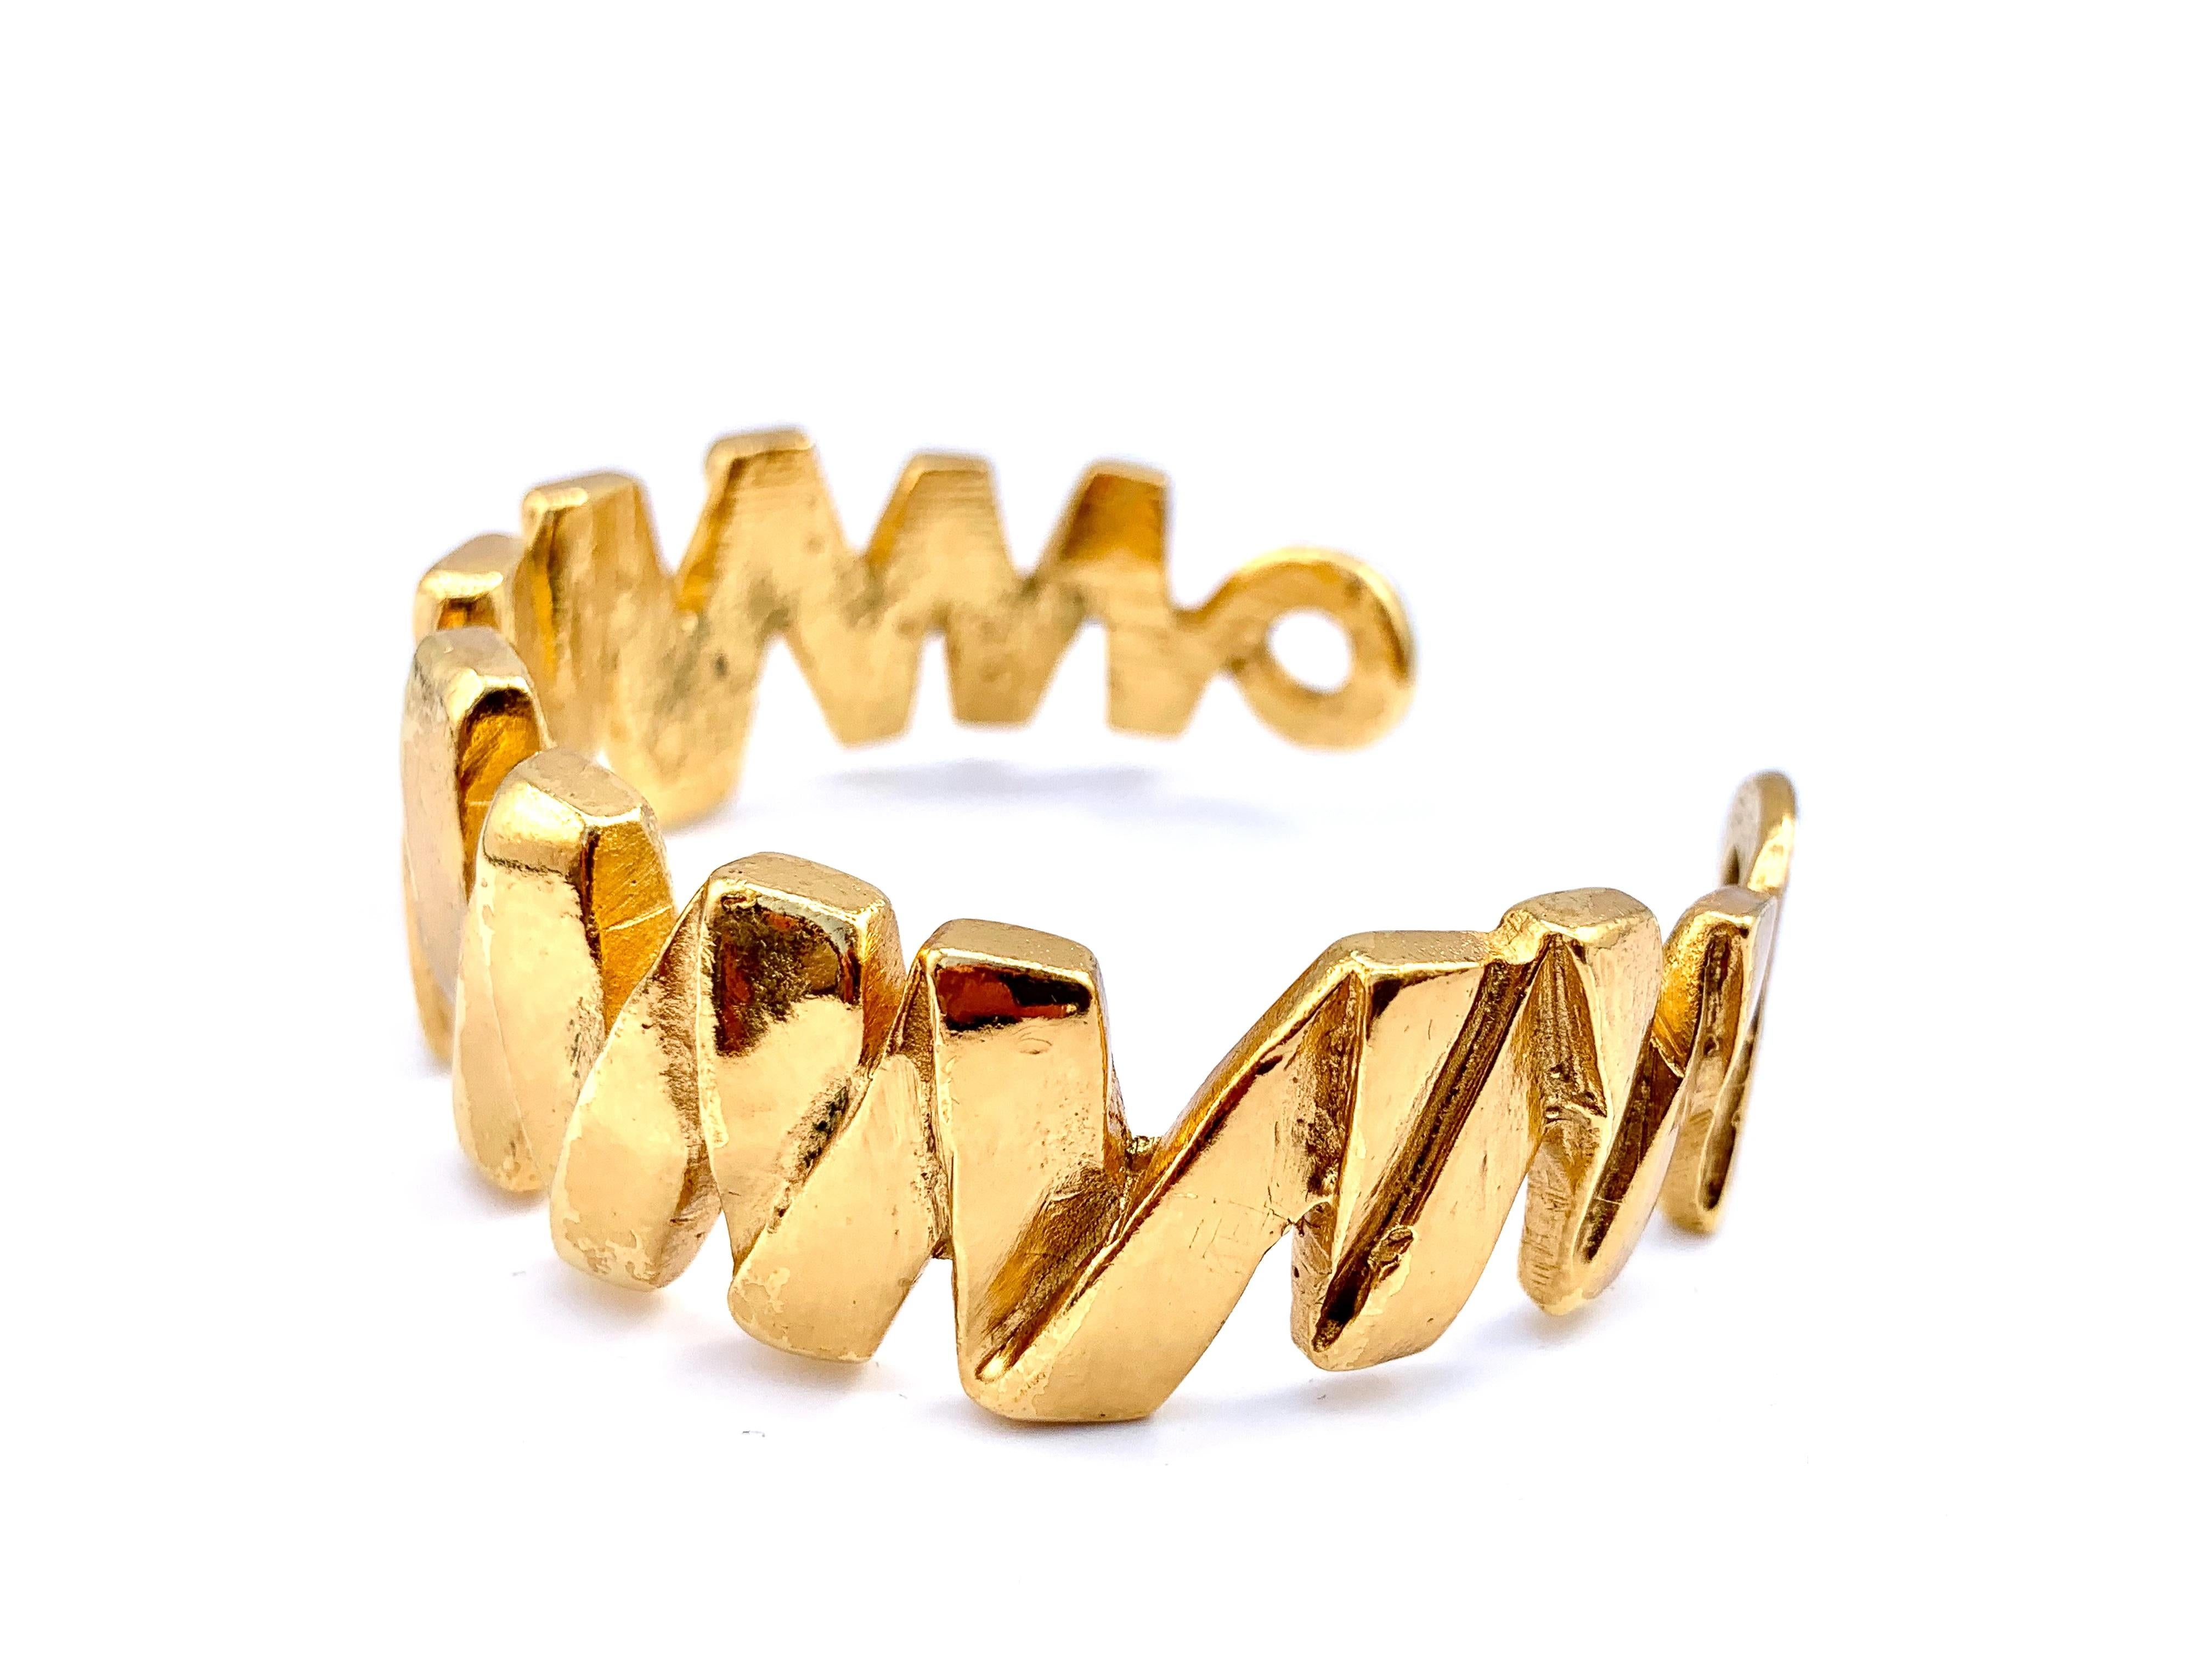 Yves Saint Laurent 1990s Statement Bracelet

 A striking vintage piece with contemporary styling from the iconic House of Yves Saint Laurent 

Detail
-Cast from a high quality sturdy gold plated metal
-Expertly crafted to create a folded zig zag